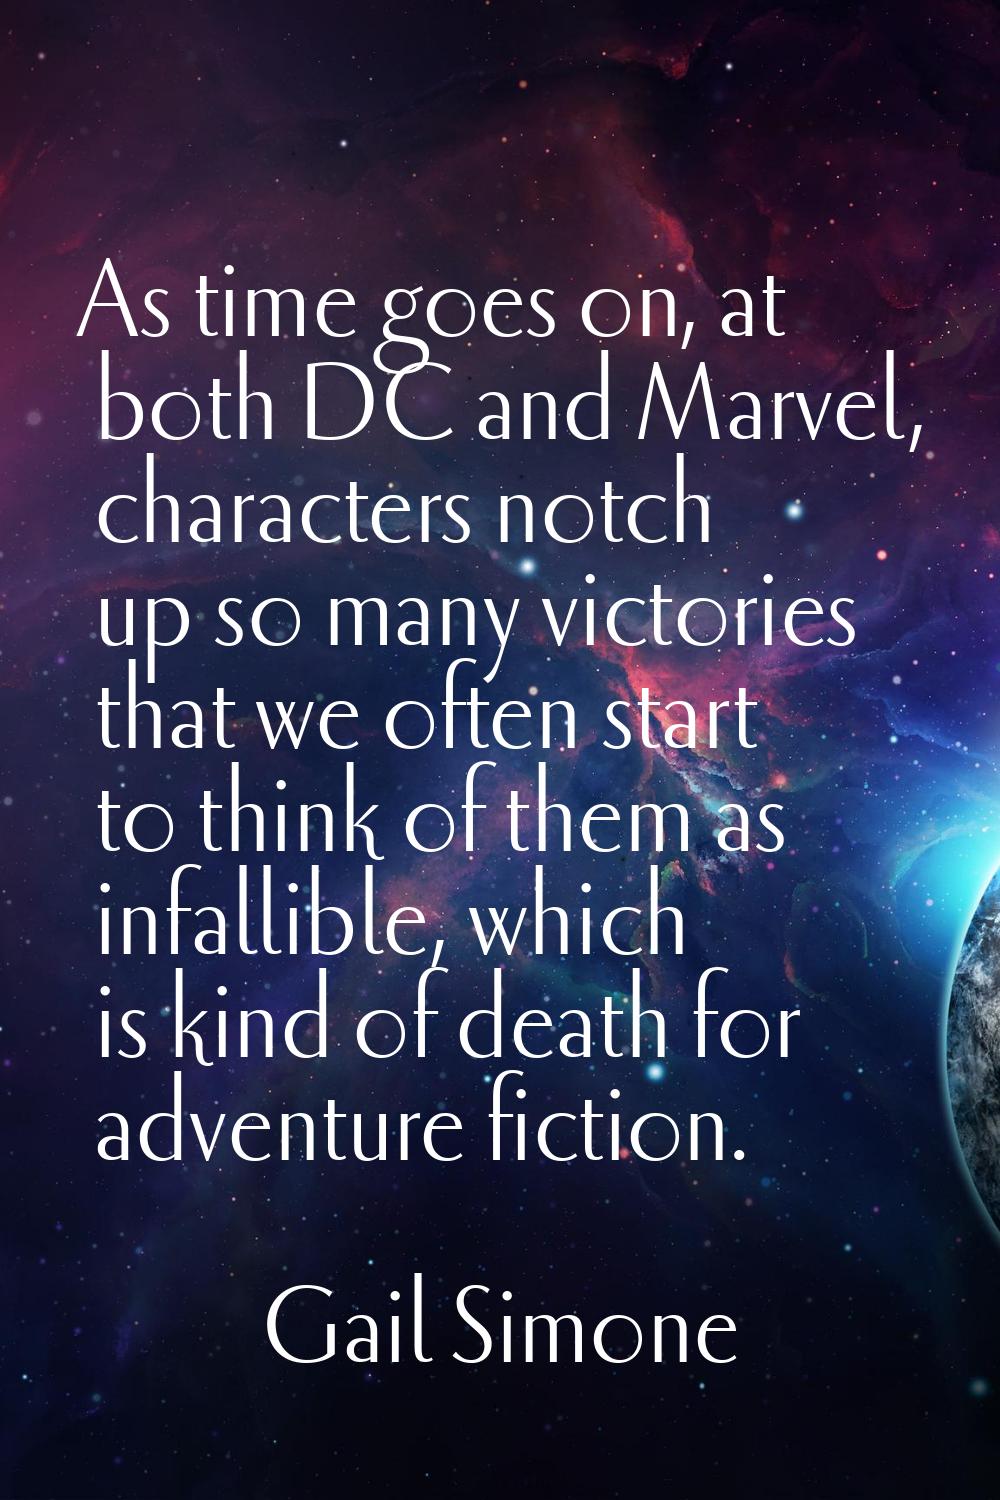 As time goes on, at both DC and Marvel, characters notch up so many victories that we often start t